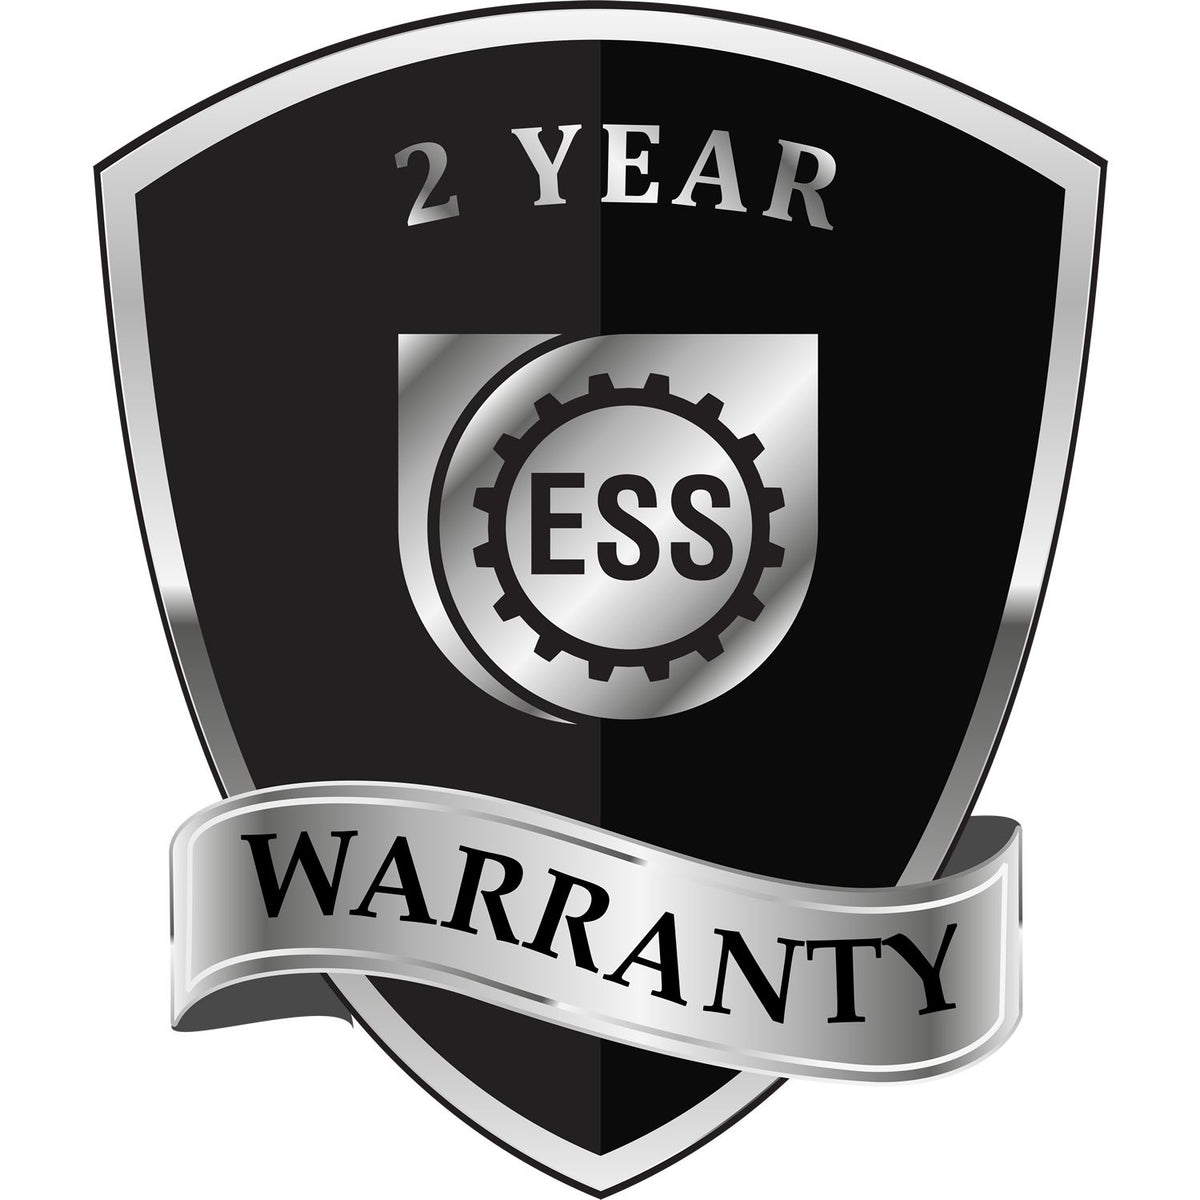 A black and silver badge or emblem showing warranty information for the Gift West Virginia Architect Seal